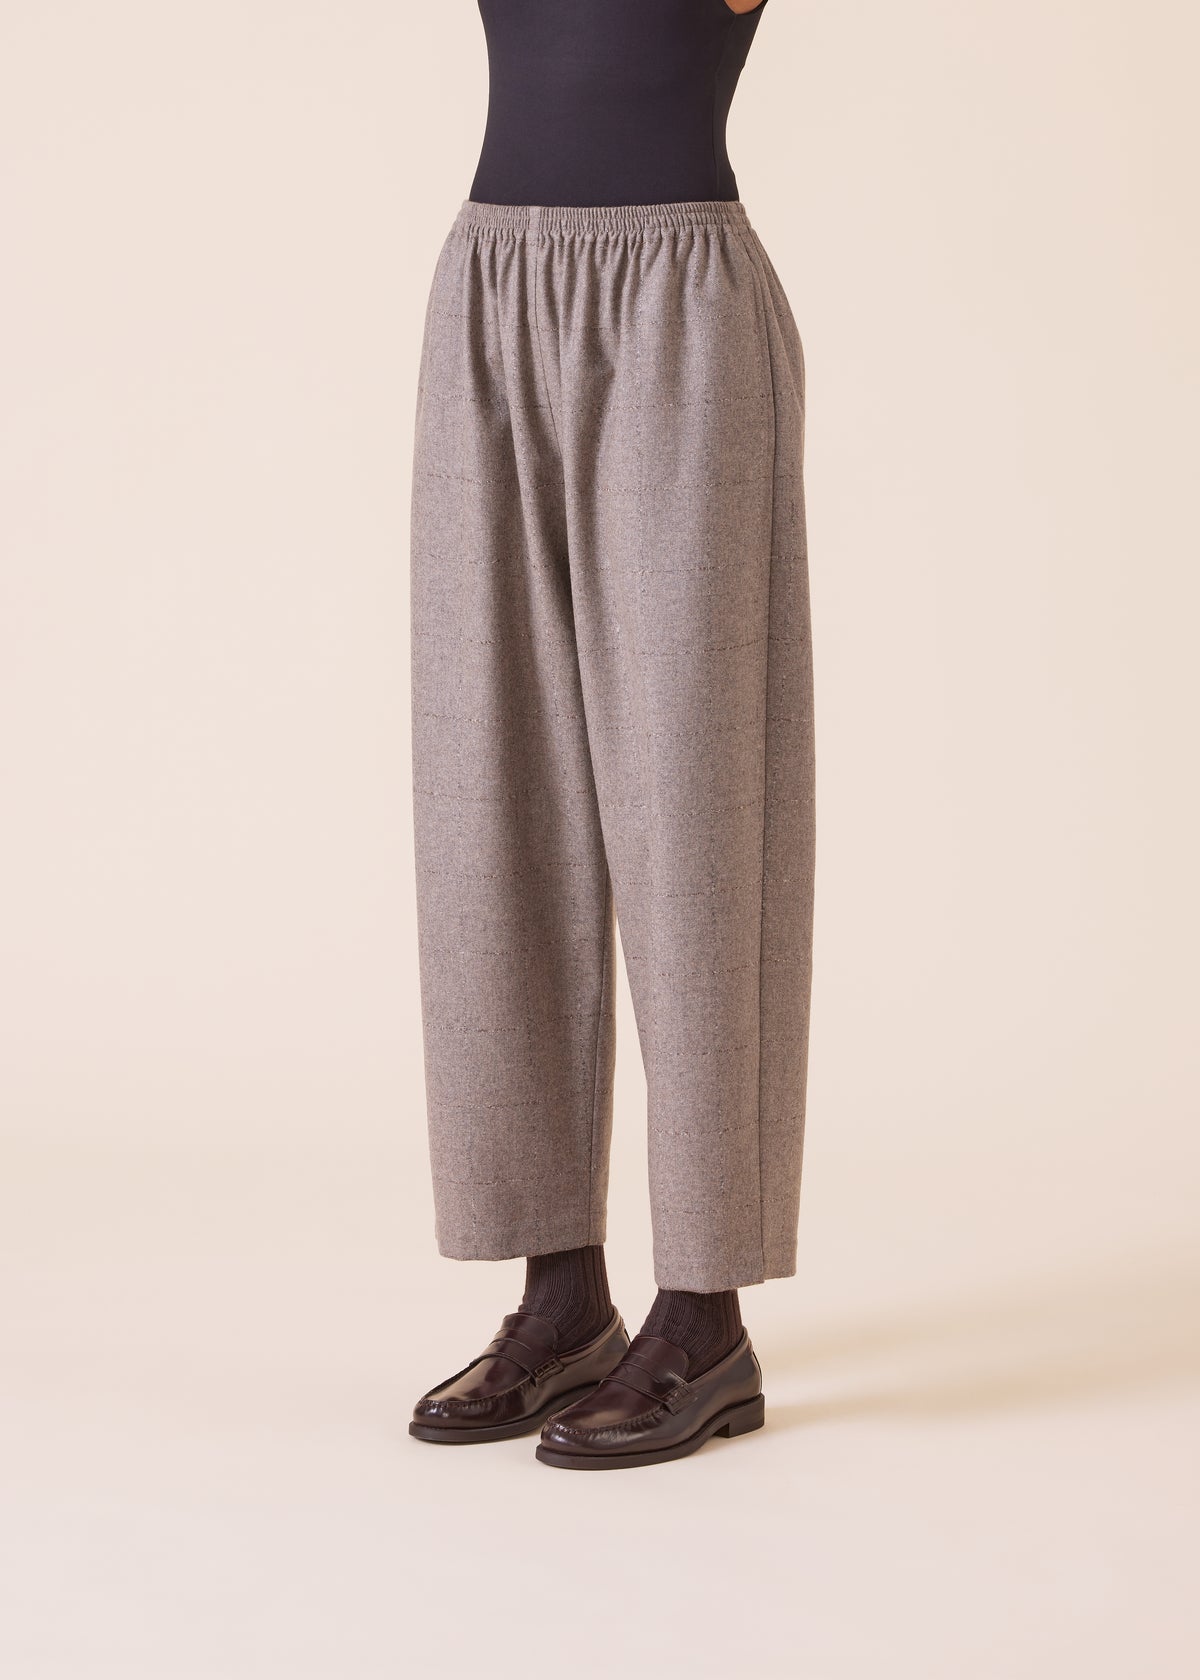 wool cashmere mix longer japanese trouser with ankle slits